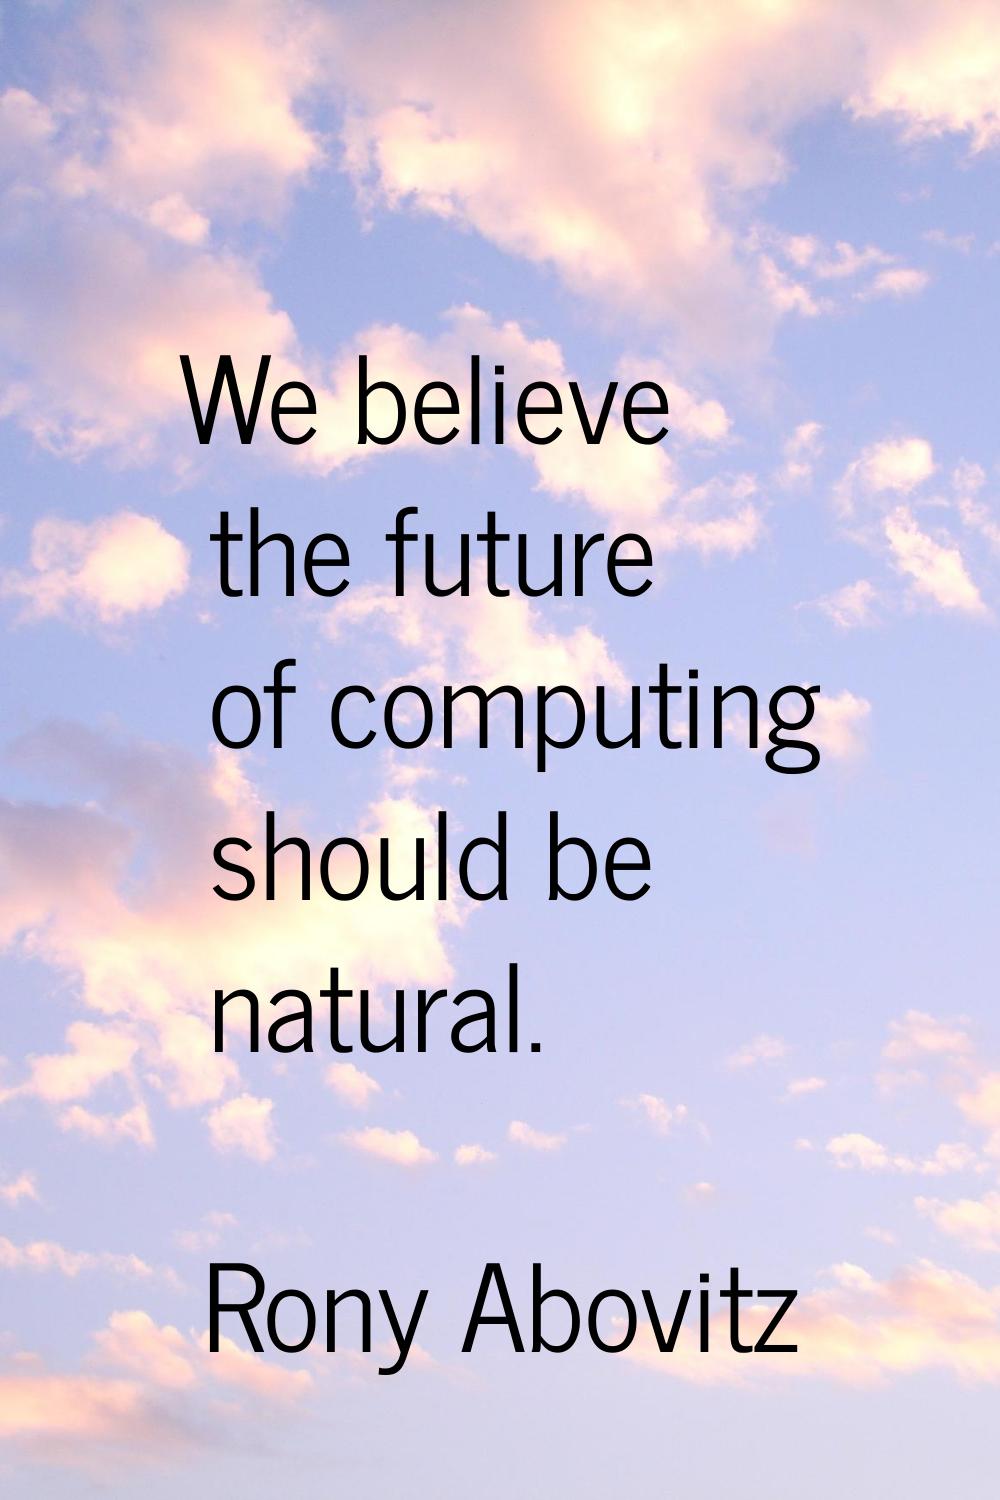 We believe the future of computing should be natural.